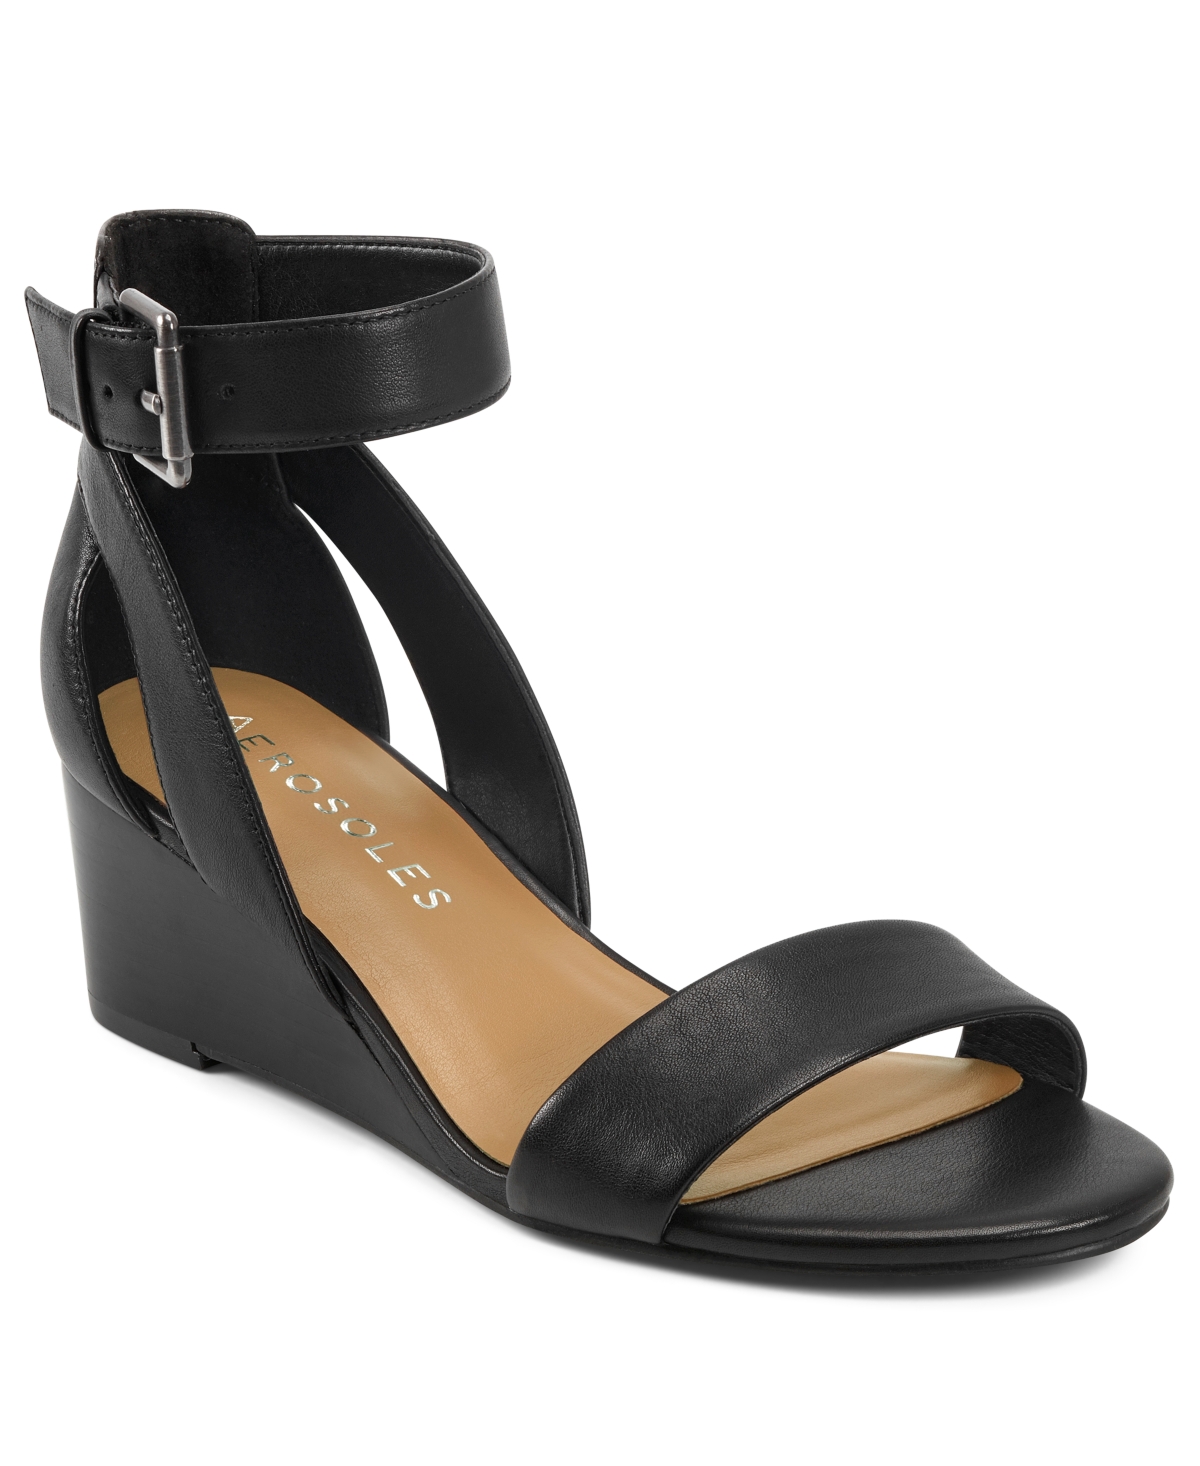 UPC 887039887440 product image for Aerosoles Willowbrook Wedge Sandals Women's Shoes | upcitemdb.com